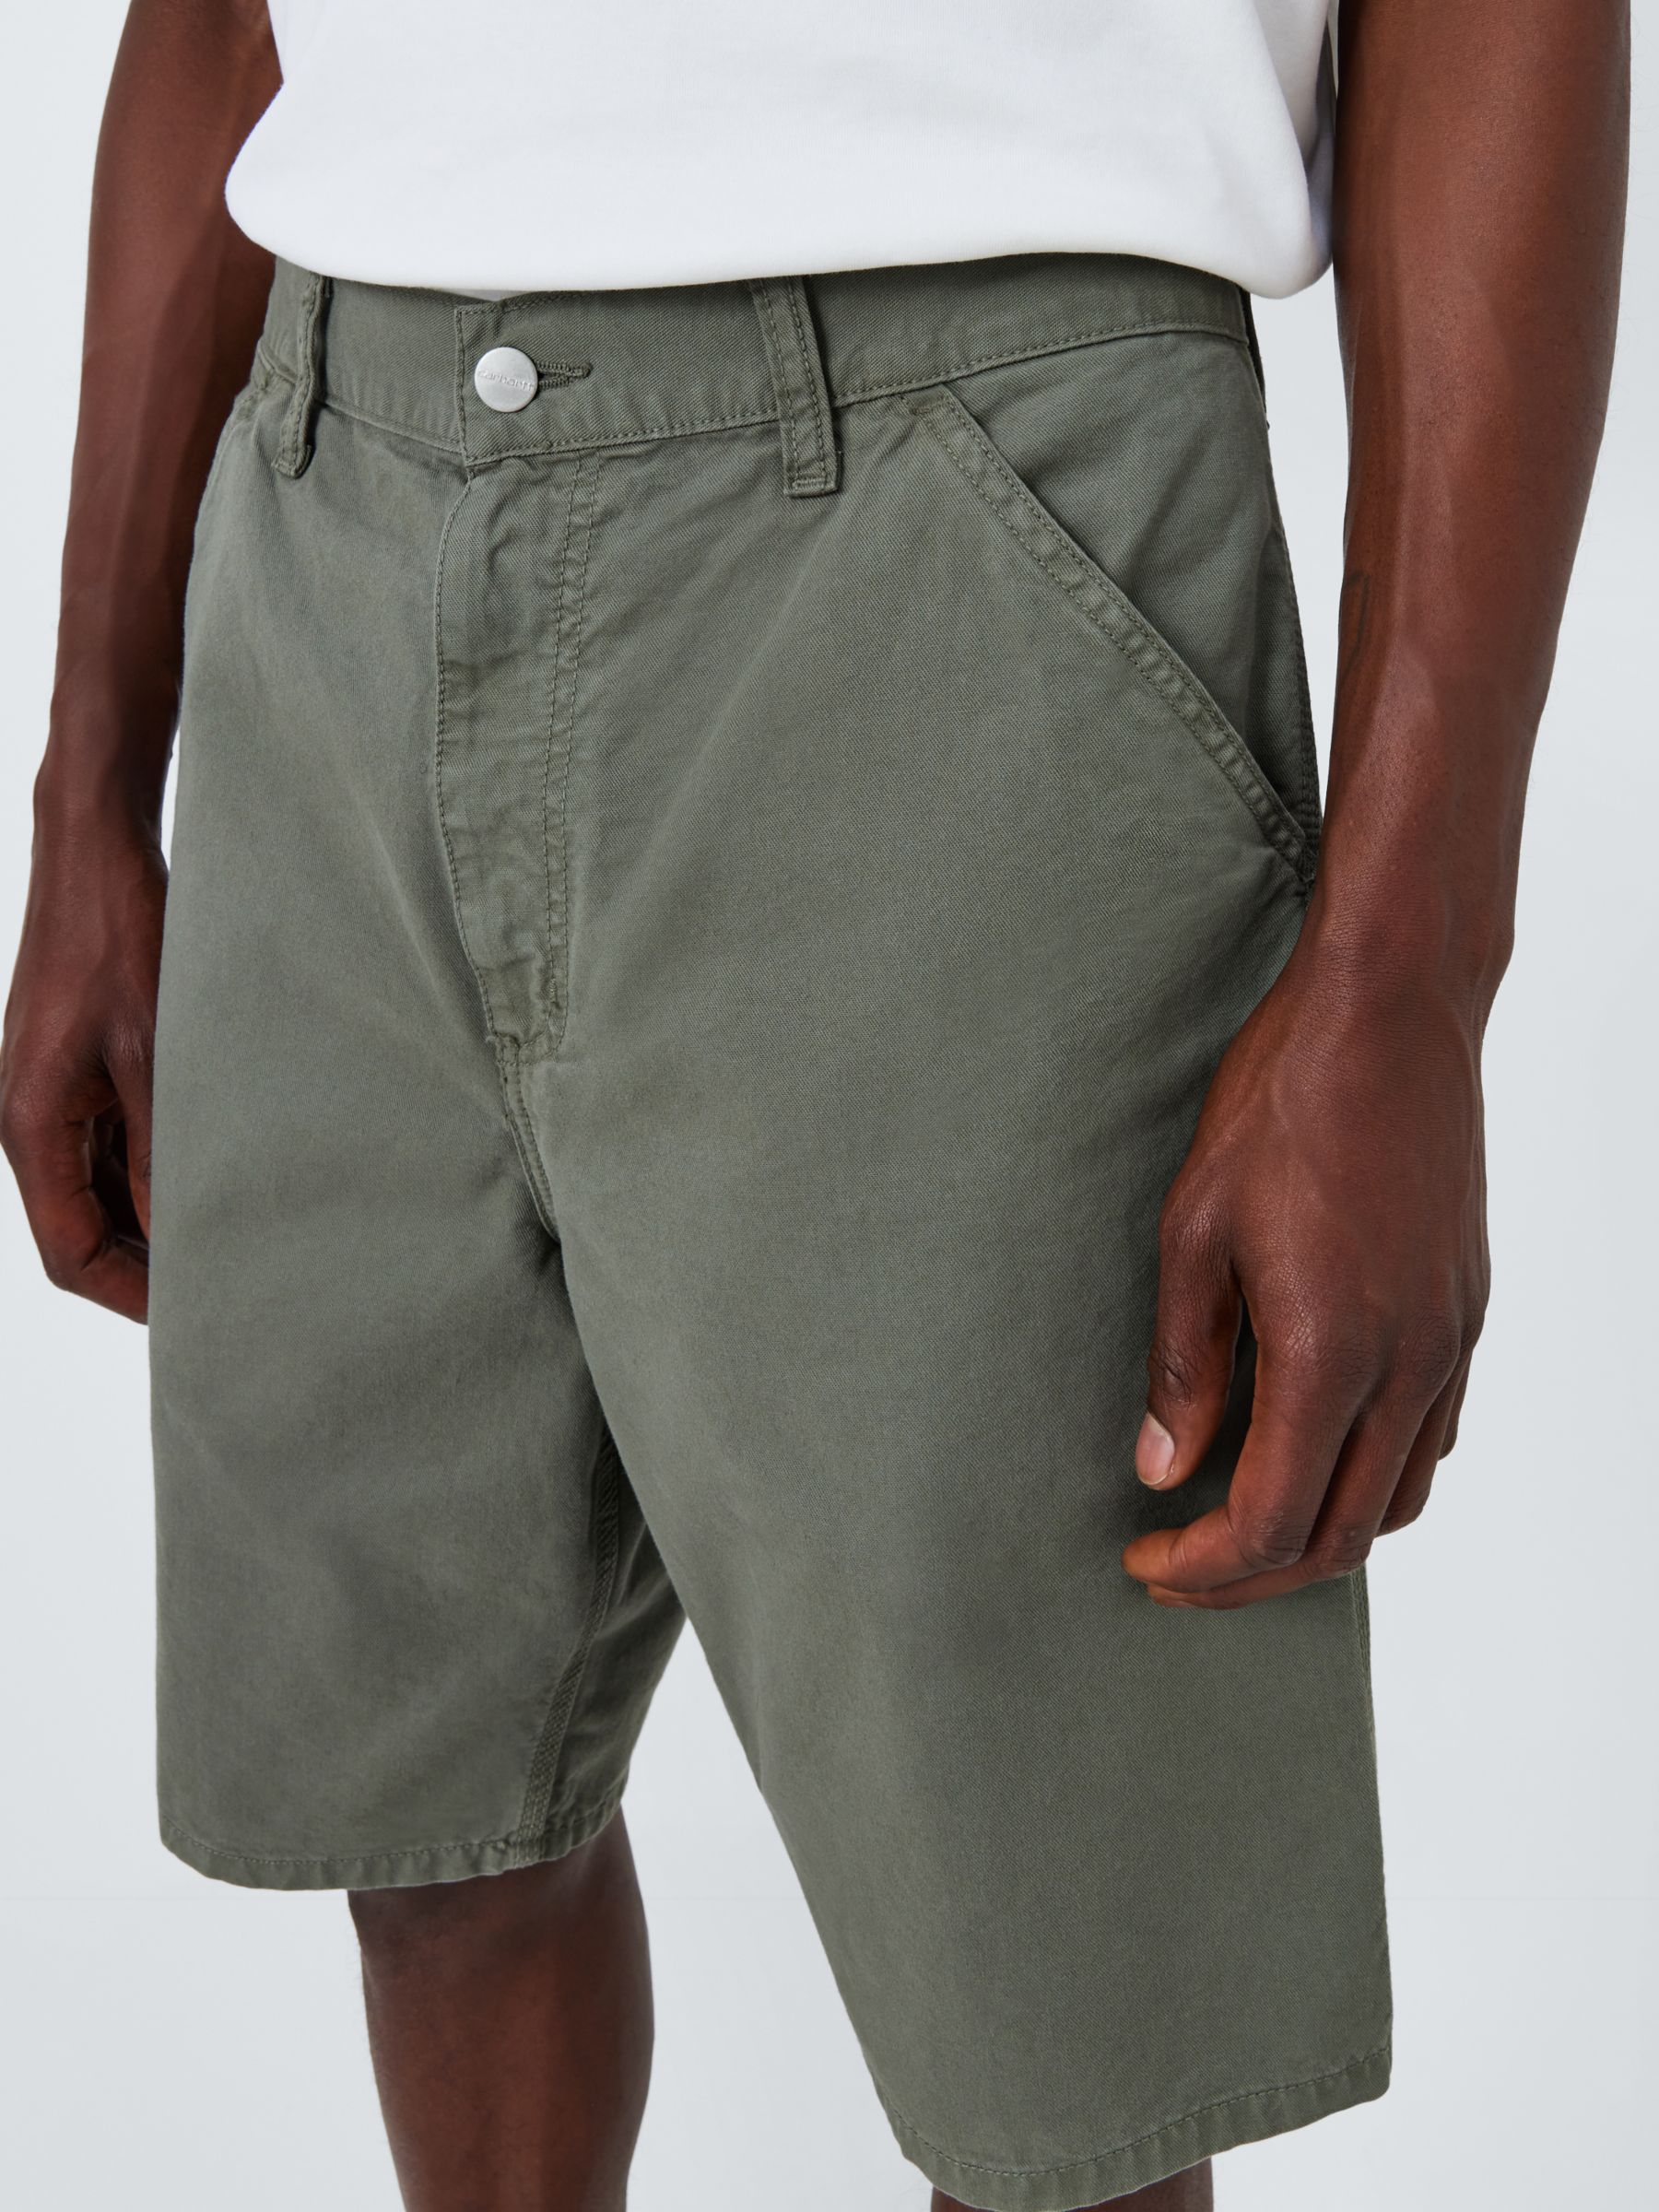 Carhartt WIP Single Knee Relaxed Fit Shorts, Park, 30R